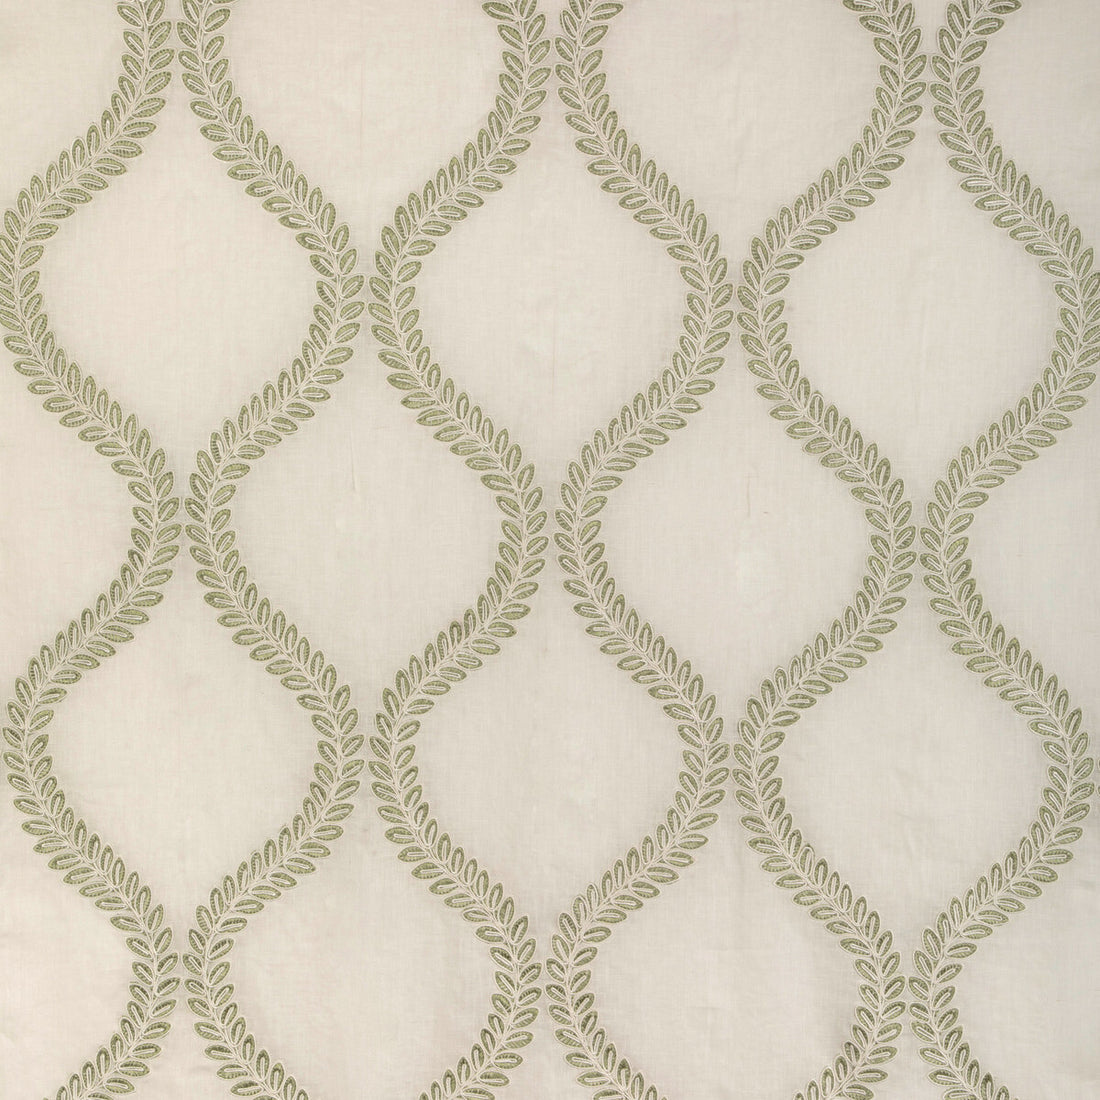 Camus Sheer fabric in leaf color - pattern 8023110.31.0 - by Brunschwig &amp; Fils in the Anduze Embroideries collection